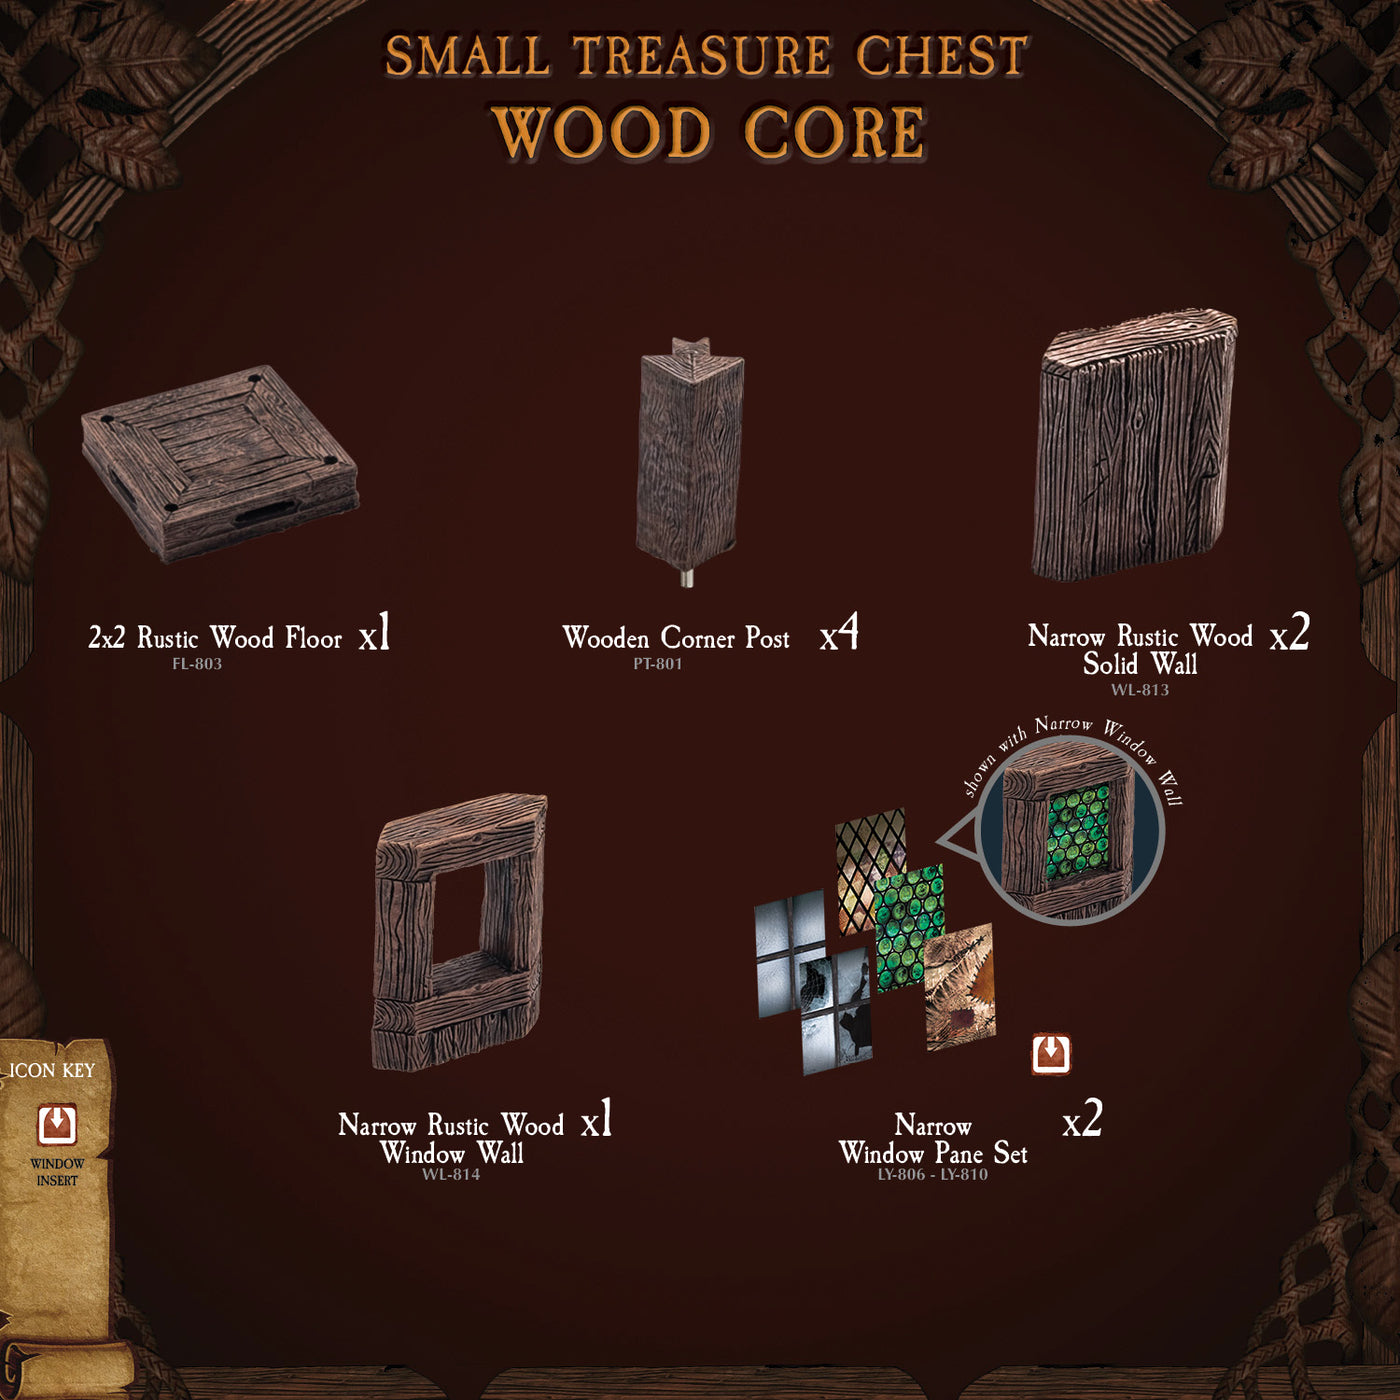 Small Treasure Chest - Wood Core (Painted)